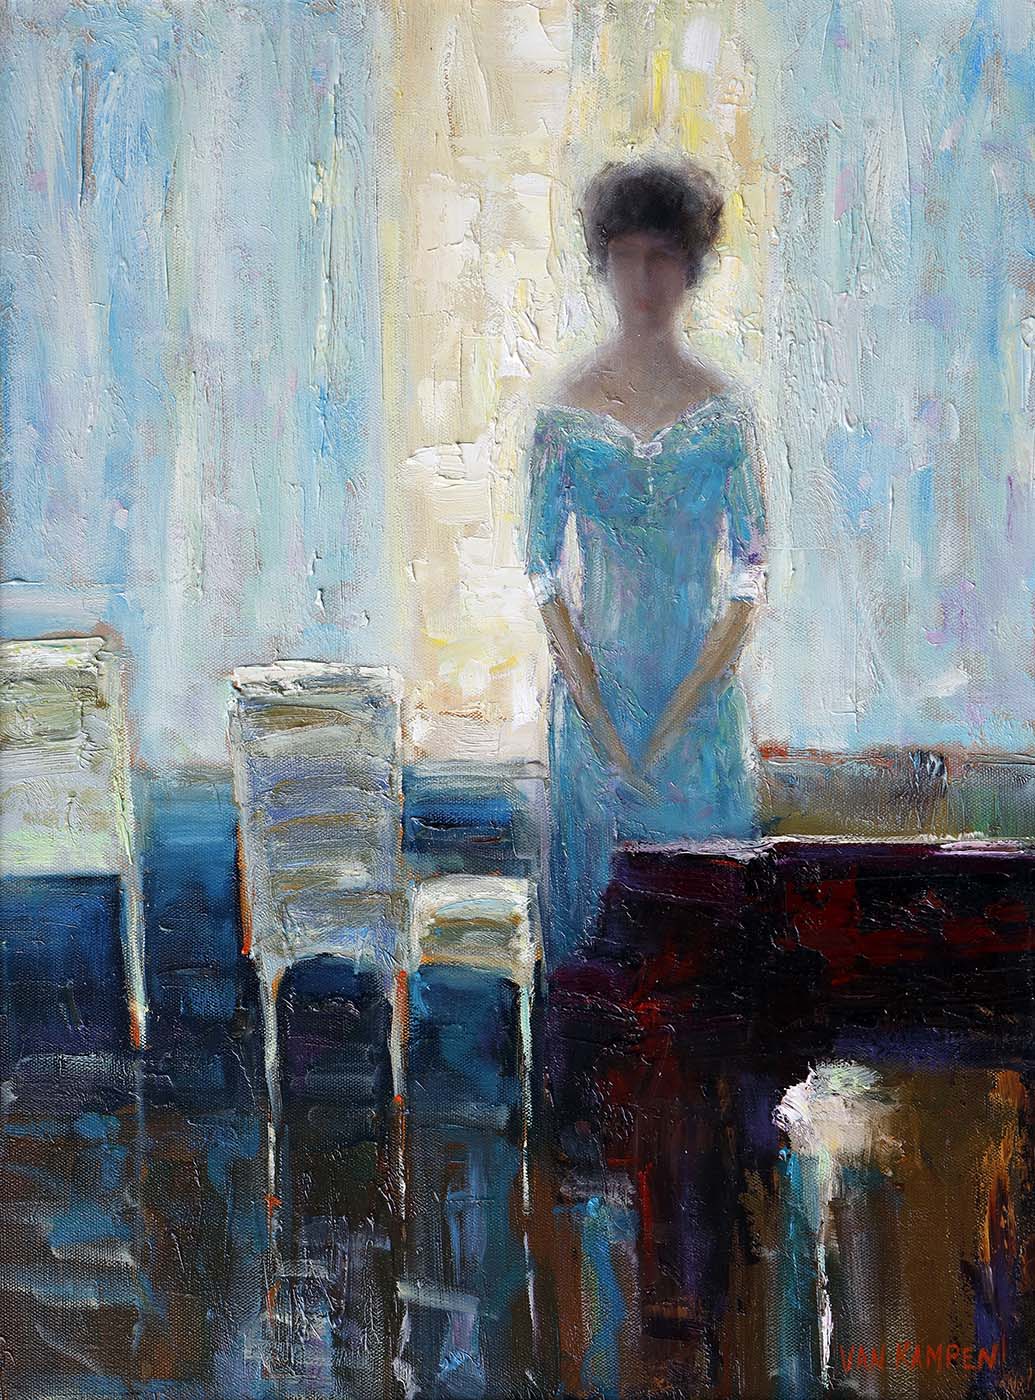 Contemporary art. Title: After the Gala, Oil on Canvas, 24x18 in by Canadian artist Katherine van Kampen.